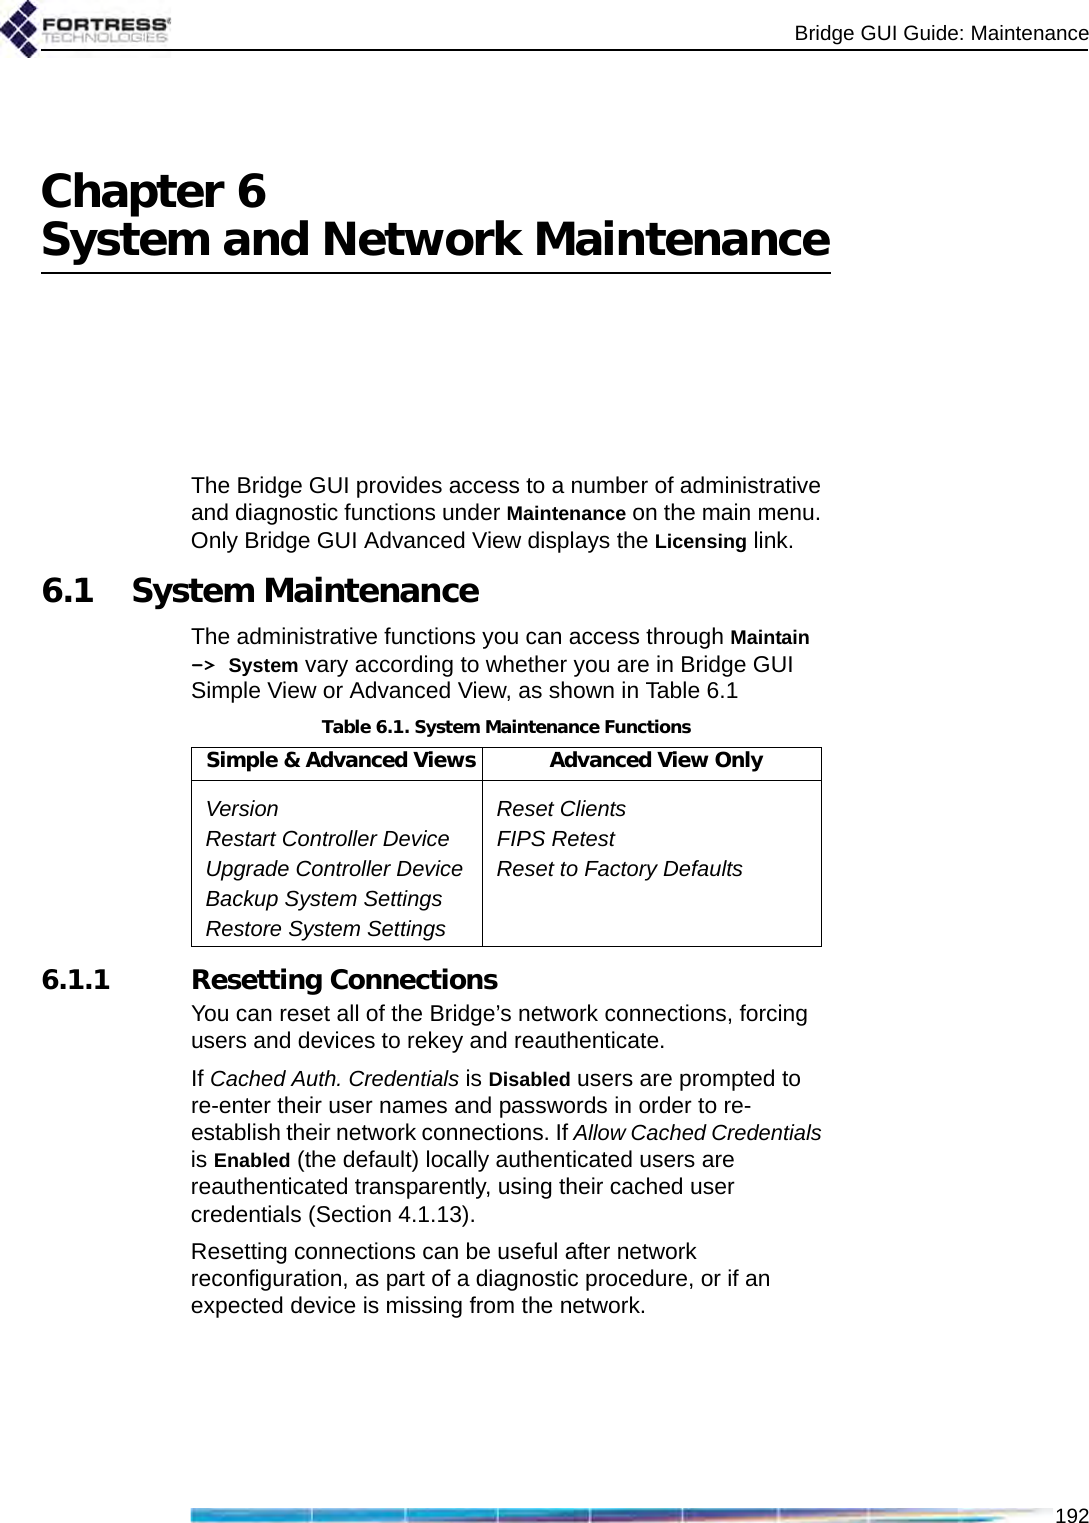 Bridge GUI Guide: Maintenance192Chapter 6System and Network MaintenanceThe Bridge GUI provides access to a number of administrative and diagnostic functions under Maintenance on the main menu. Only Bridge GUI Advanced View displays the Licensing link.6.1 System MaintenanceThe administrative functions you can access through Maintain -&gt; System vary according to whether you are in Bridge GUI Simple View or Advanced View, as shown in Table 6.16.1.1 Resetting ConnectionsYou can reset all of the Bridge’s network connections, forcing users and devices to rekey and reauthenticate. If Cached Auth. Credentials is Disabled users are prompted to re-enter their user names and passwords in order to re-establish their network connections. If Allow Cached Credentials is Enabled (the default) locally authenticated users are reauthenticated transparently, using their cached user credentials (Section 4.1.13).Resetting connections can be useful after network reconfiguration, as part of a diagnostic procedure, or if an expected device is missing from the network.Table 6.1. System Maintenance FunctionsSimple &amp; Advanced Views Advanced View OnlyVersion Reset ClientsRestart Controller Device FIPS RetestUpgrade Controller Device Reset to Factory DefaultsBackup System SettingsRestore System Settings